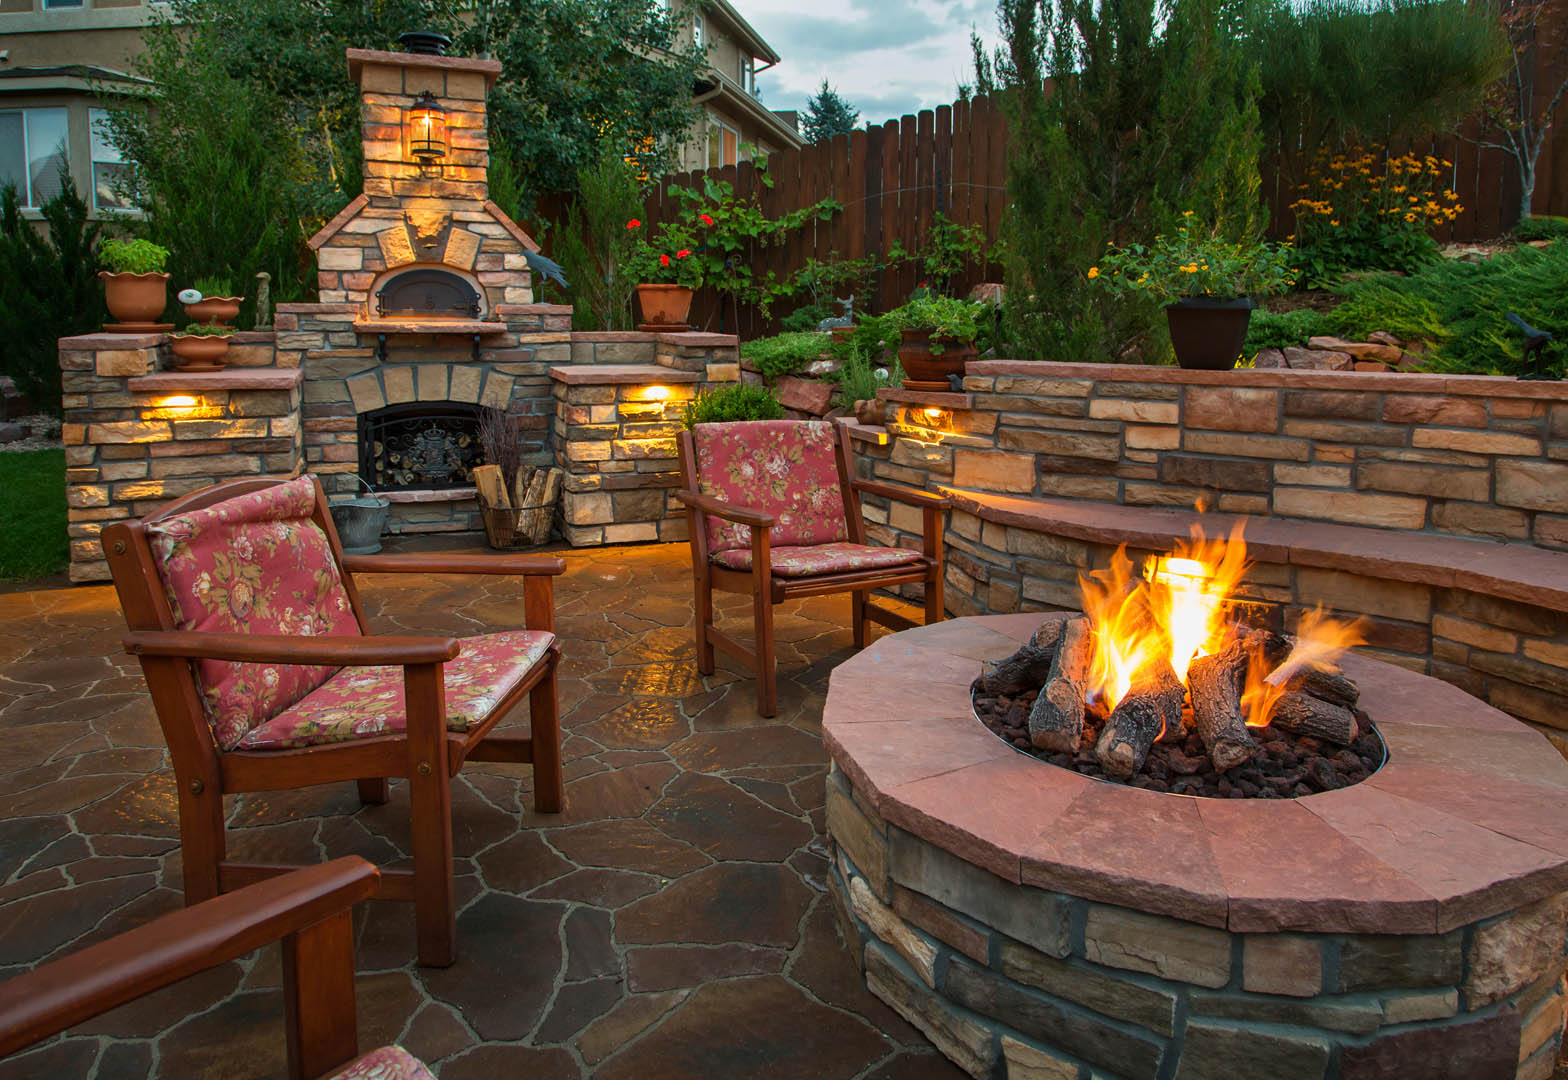 A fire pit with chairs around it and a fireplace.